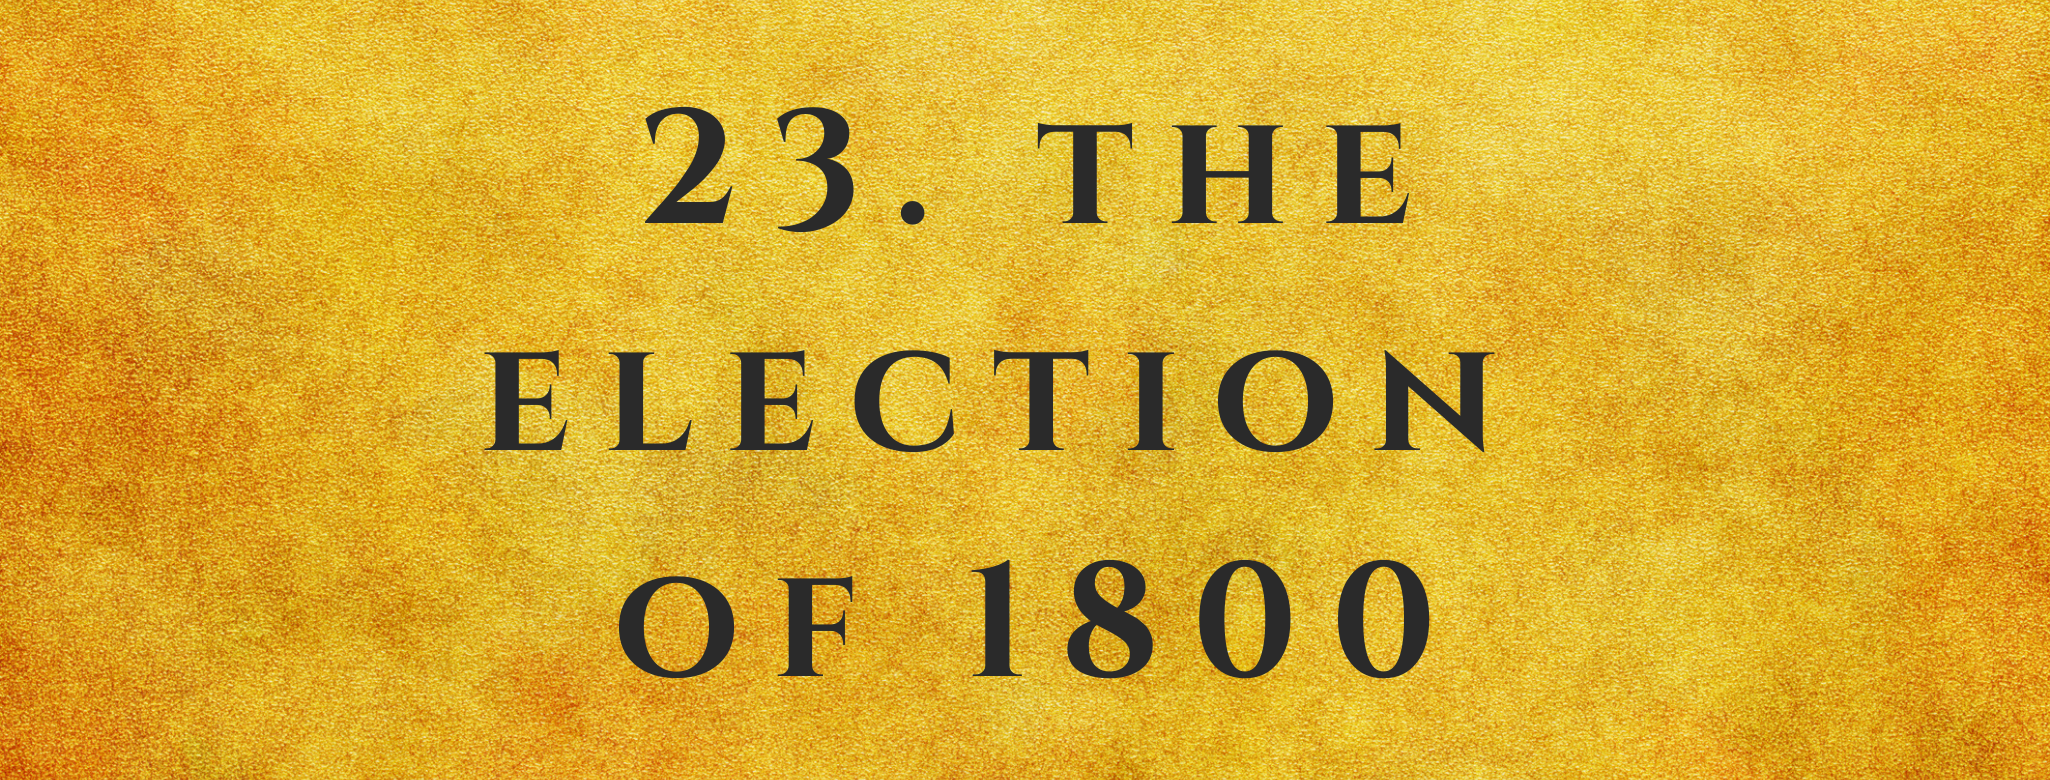 #23 The Election of 1800